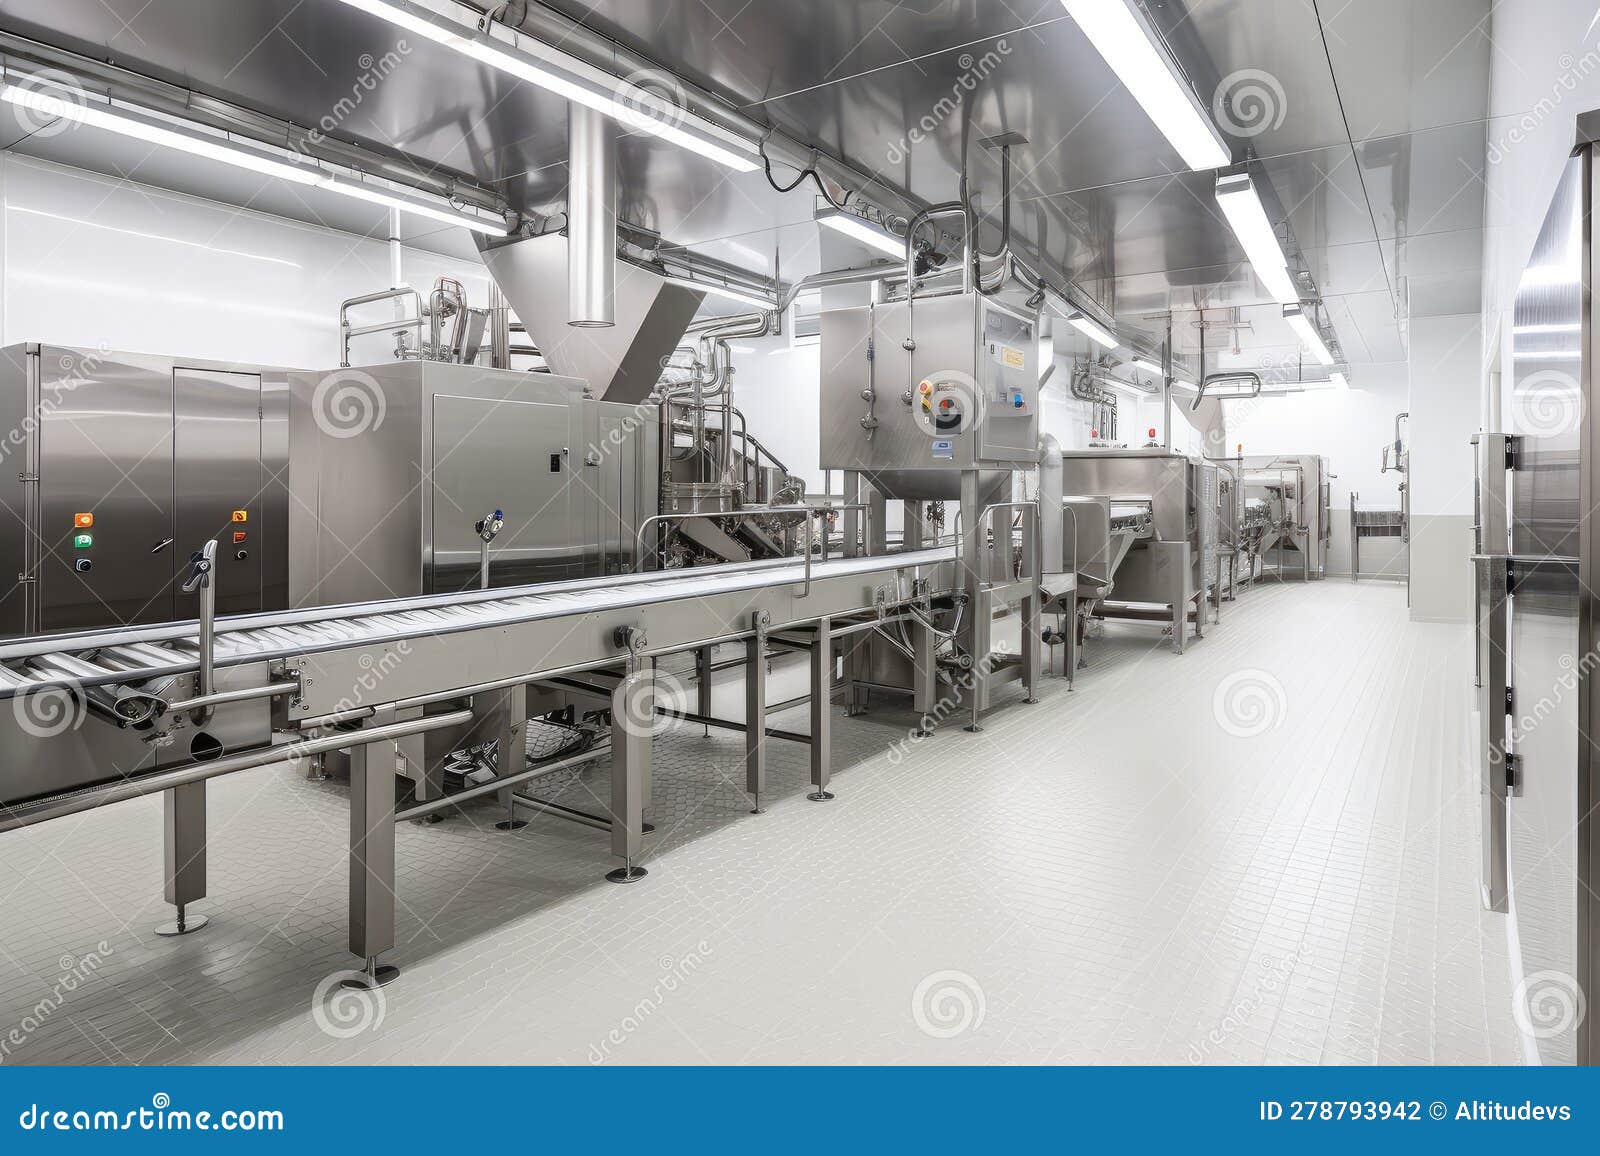 https://thumbs.dreamstime.com/z/modern-food-production-facility-automated-systems-cutting-edge-technology-created-generative-ai-278793942.jpg